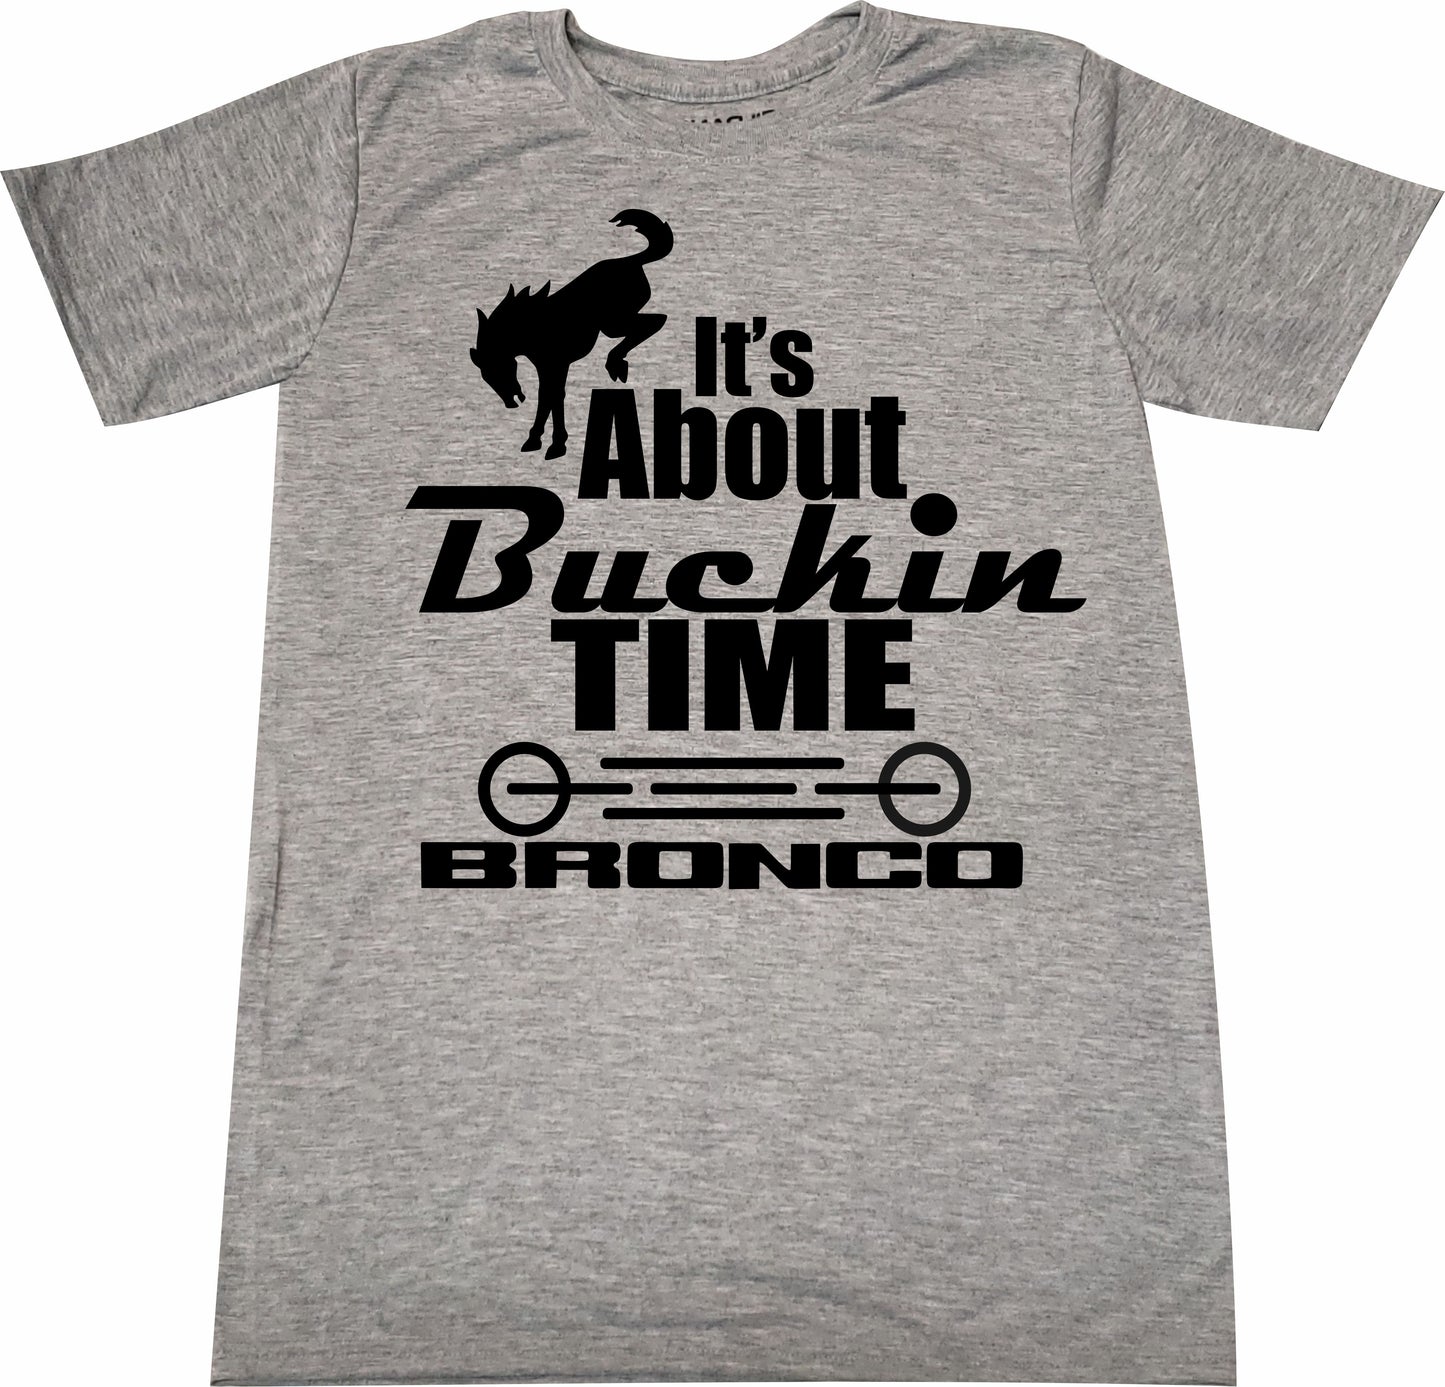 It's About Buckin Time Bronco Shirt